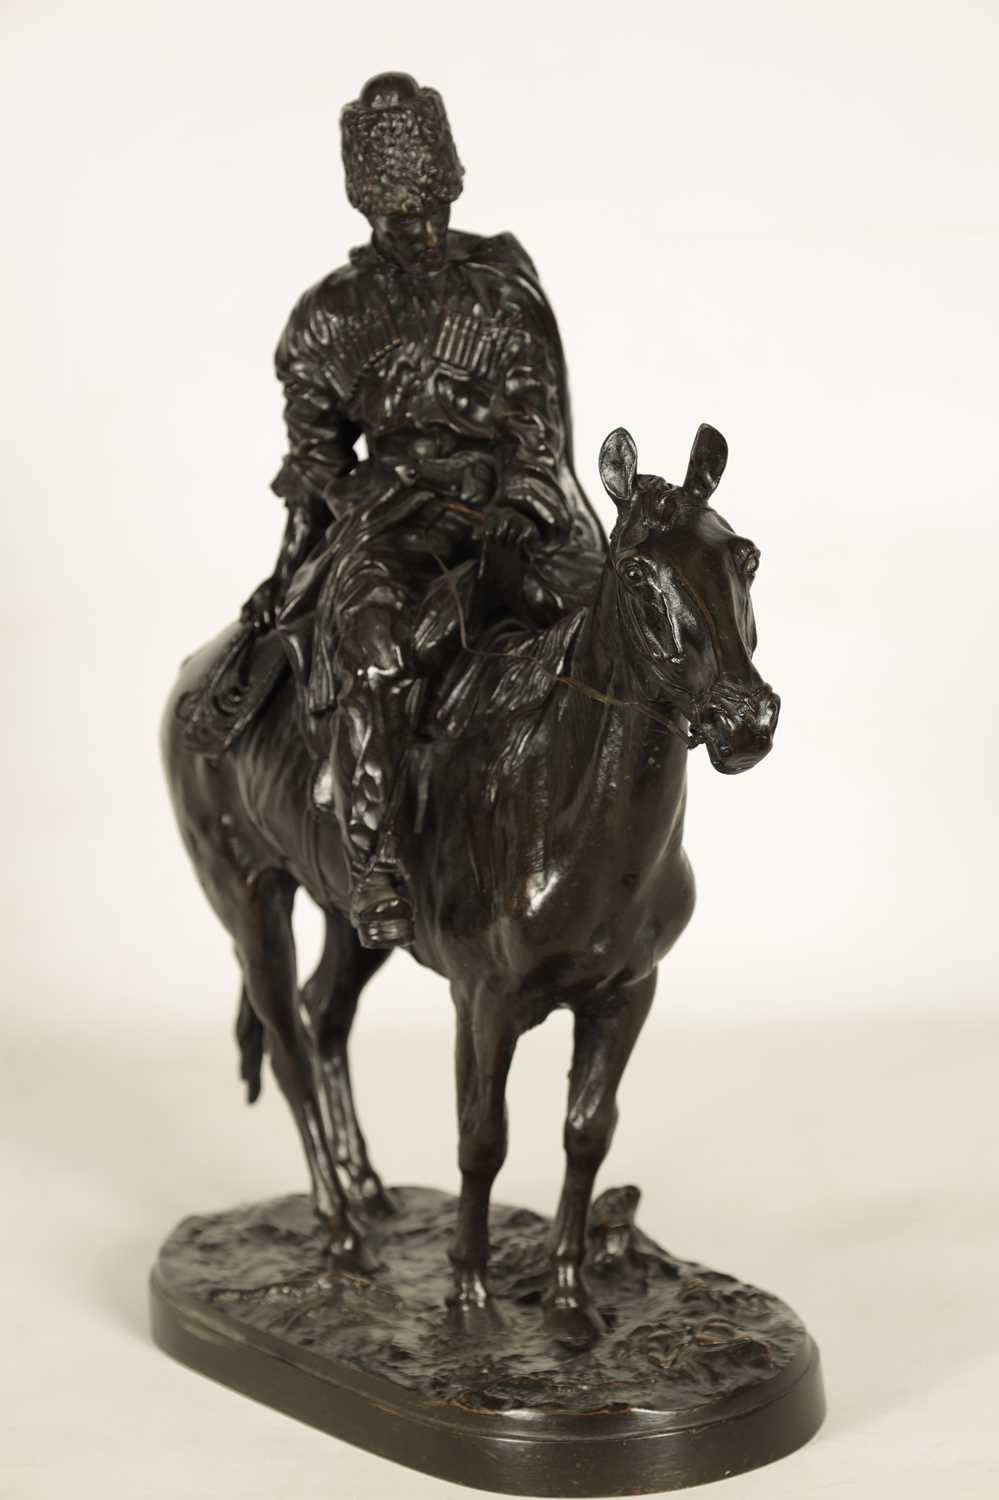 E. NAHCEPE. A LATE 19TH CENTURY RUSSIAN PATINATED BRONZE SCULPTURE - Image 3 of 21